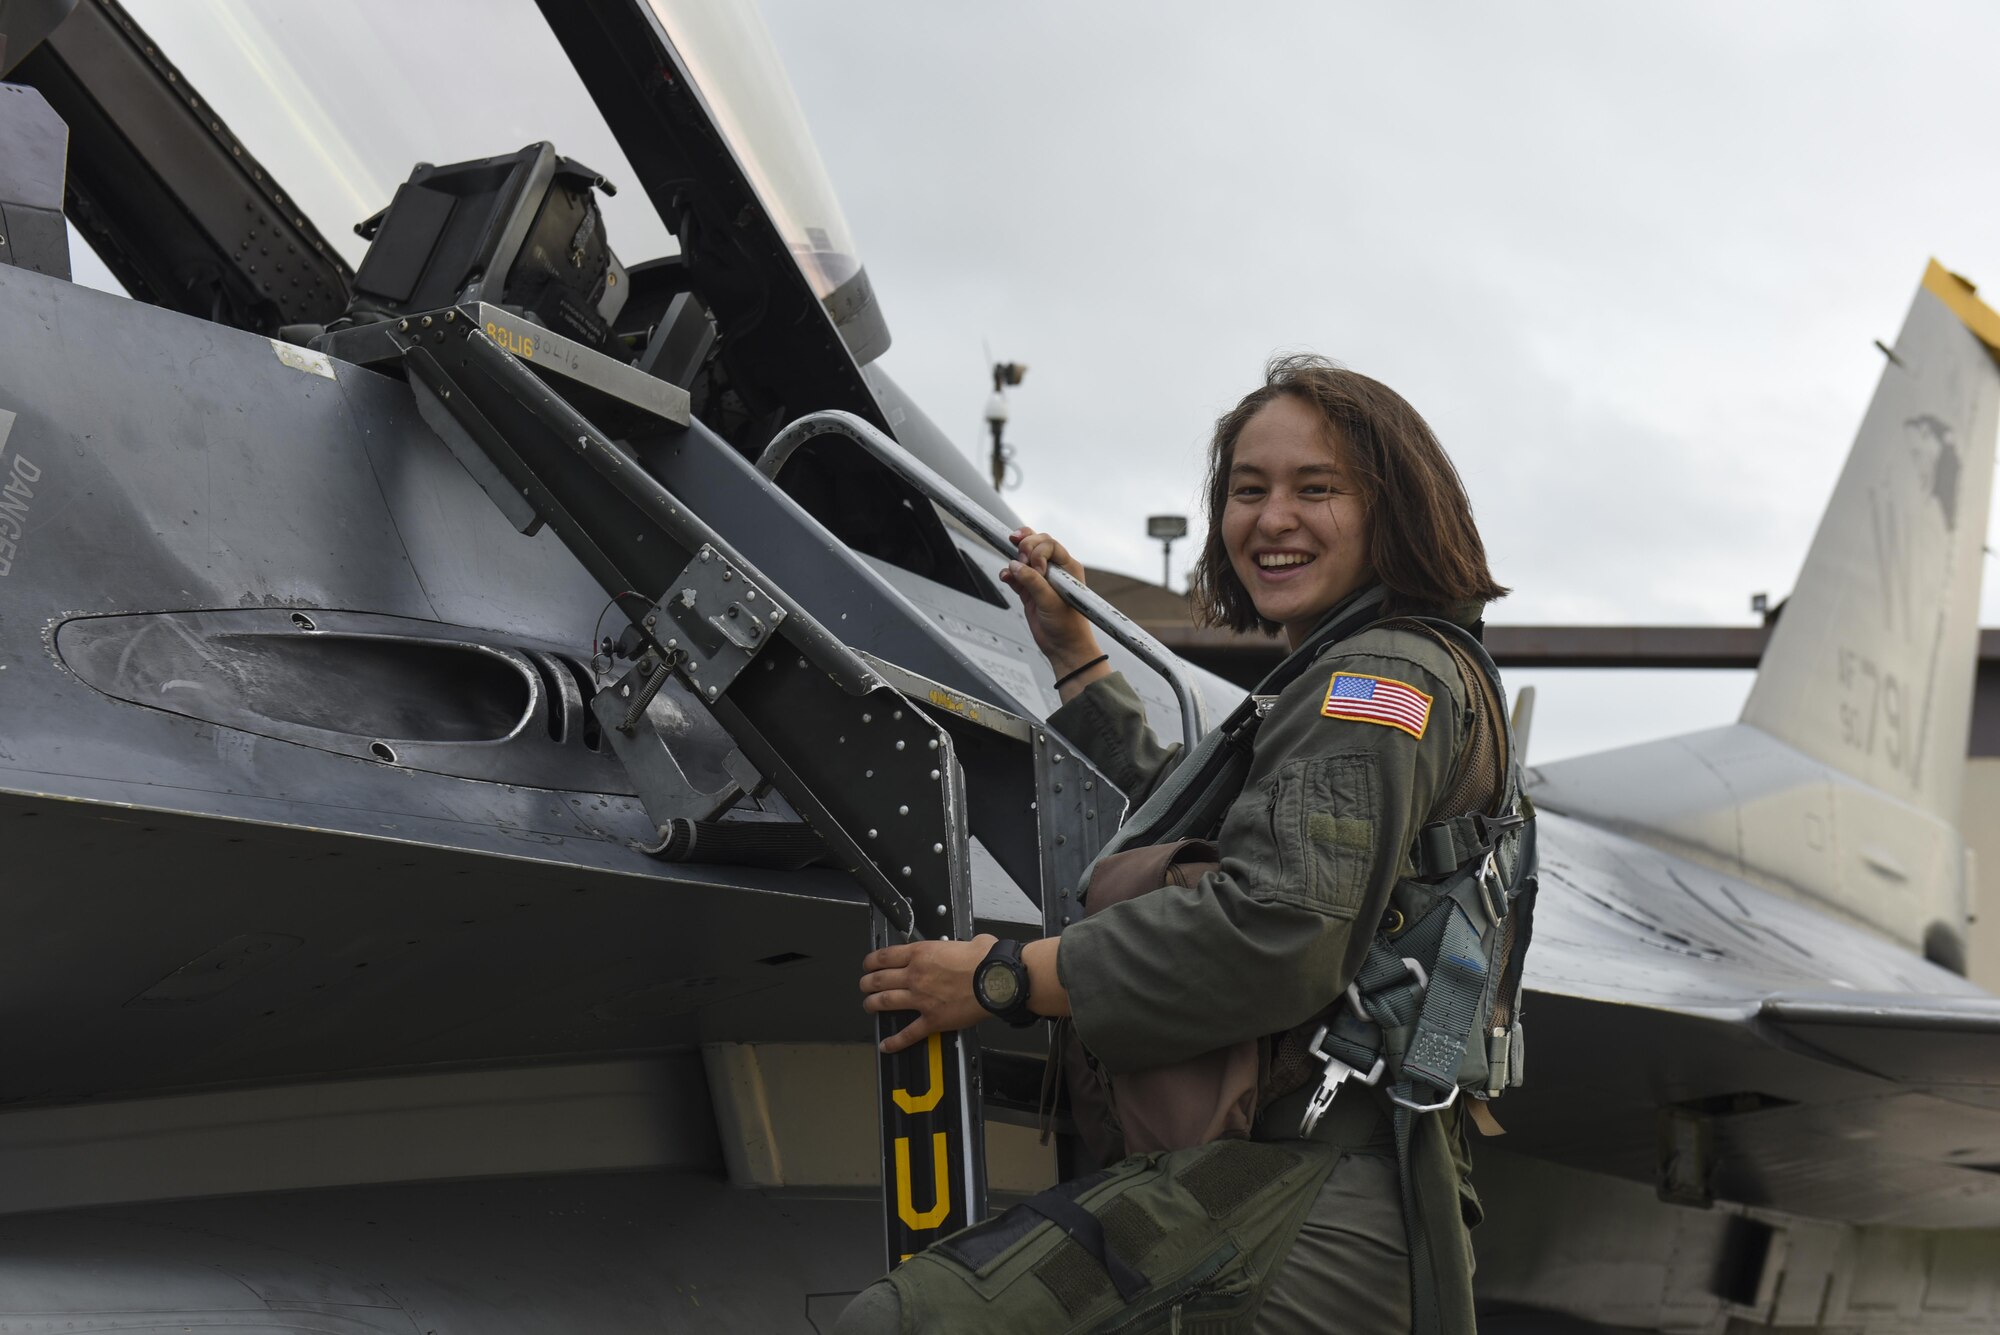 U.S. Air Force Academy Cadet 2nd Class Madison Tung climbs out of an F-16 Fighting Falcon at Kunsan Air Base, Republic of Korea, July 11, 2017. While visiting various bases through the Operation Air Force program, juniors from the Air Force Academy learn about different career fields by shadowing officer and enlisted Airmen and learn what specific operational base missions look like. (U.S. Air Force photo by Senior Airman Michael Hunsaker/Released)